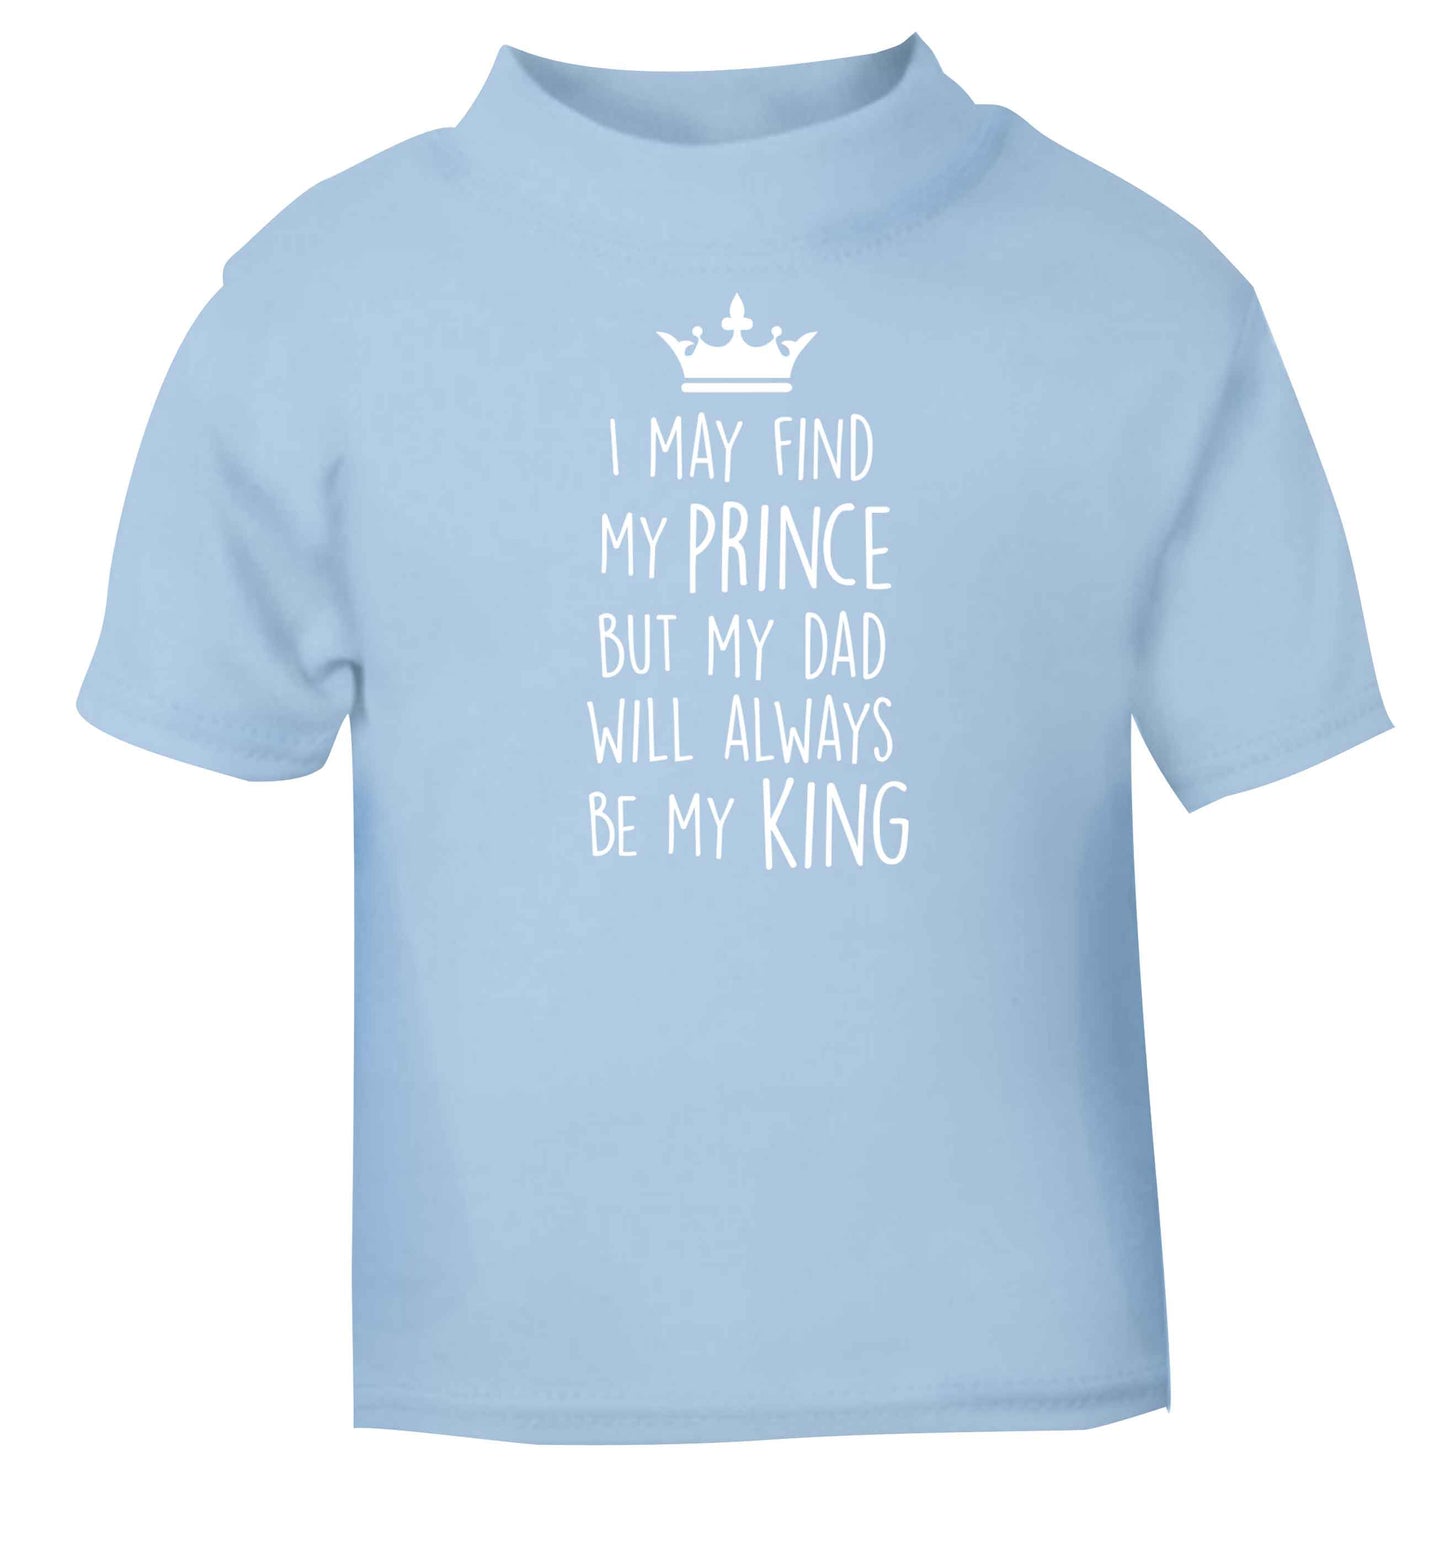 I may find my prince but my dad will always be my king light blue baby toddler Tshirt 2 Years